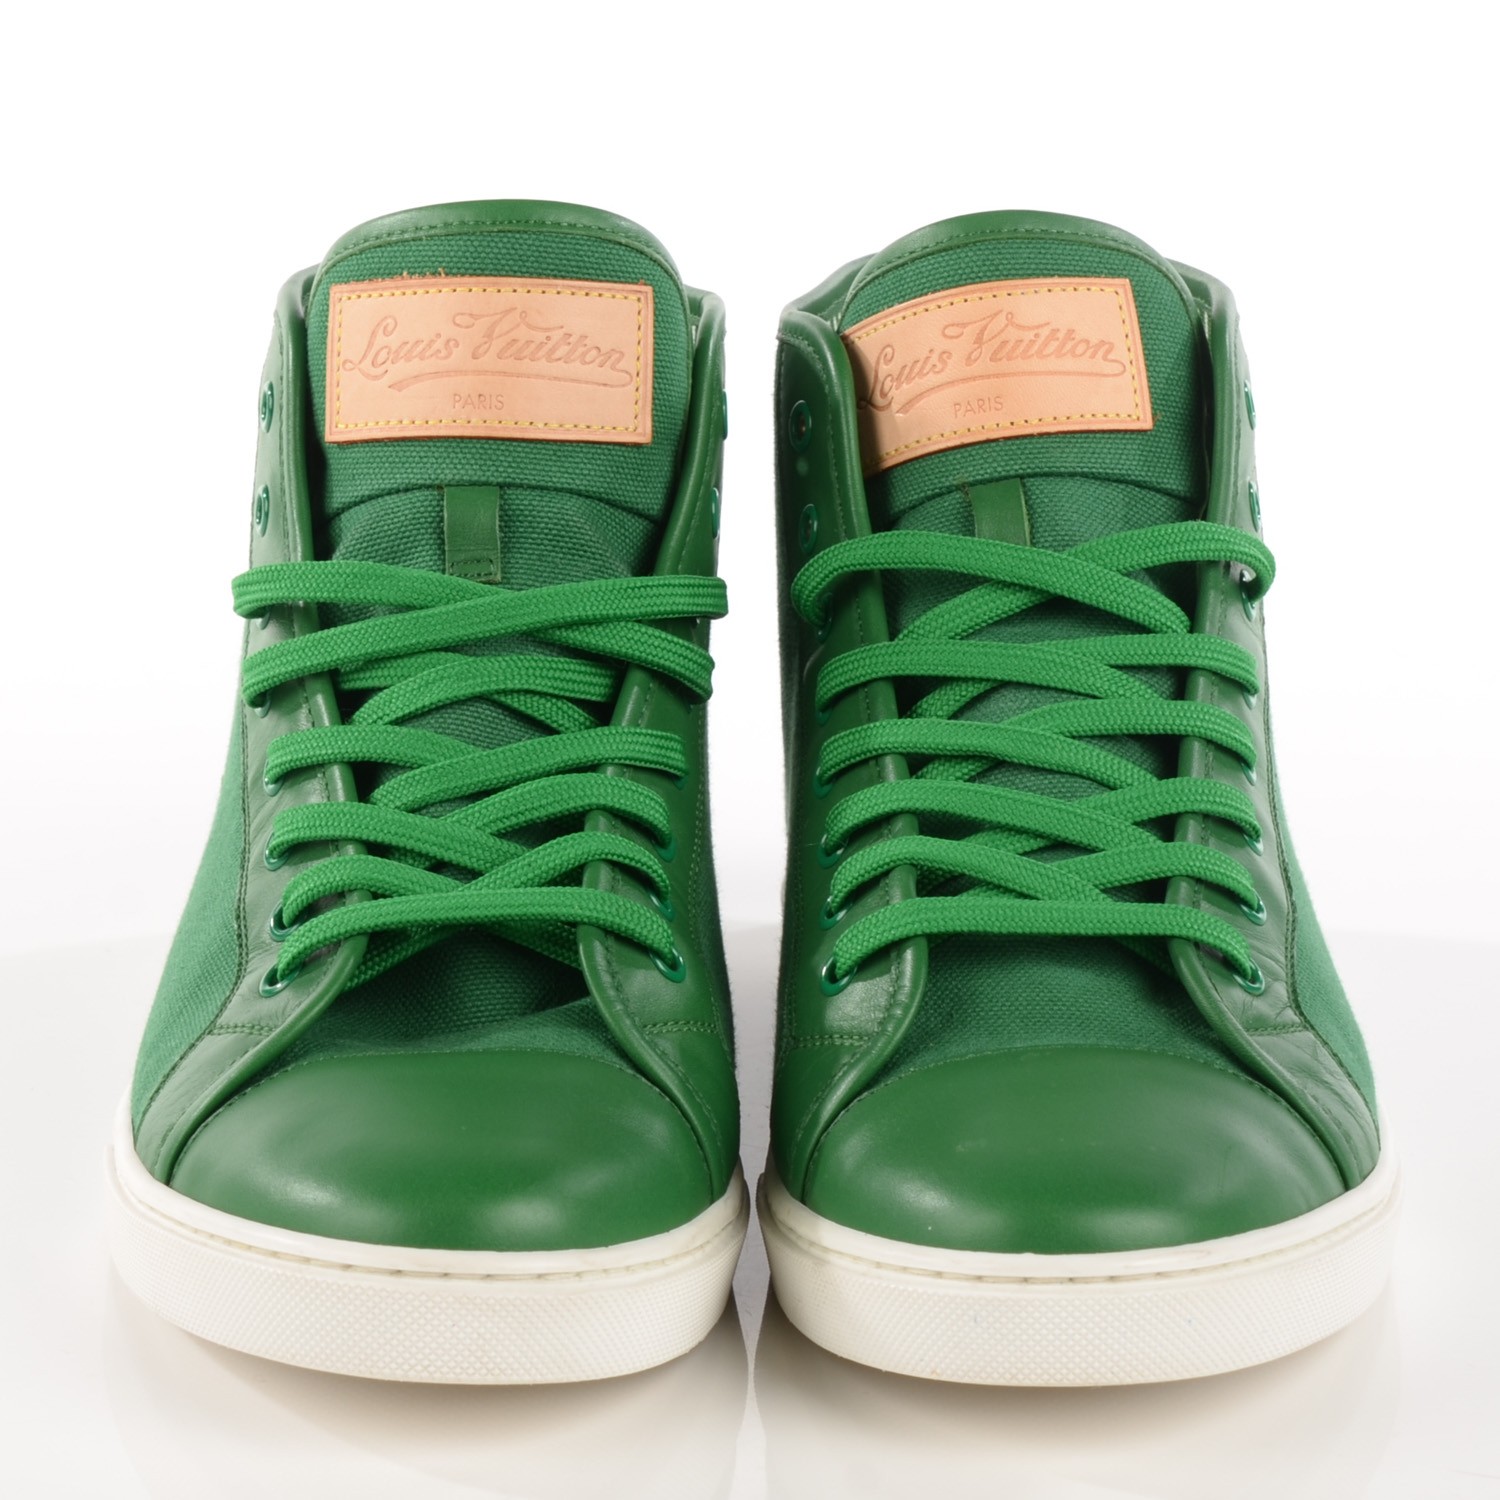 Argosyminerals Sneakers Sale Online - LOUIS VUITTON MONOGRAM GREEN WHITE  TRAINER - Louis Vuitton Uncovers High-Tech s in China